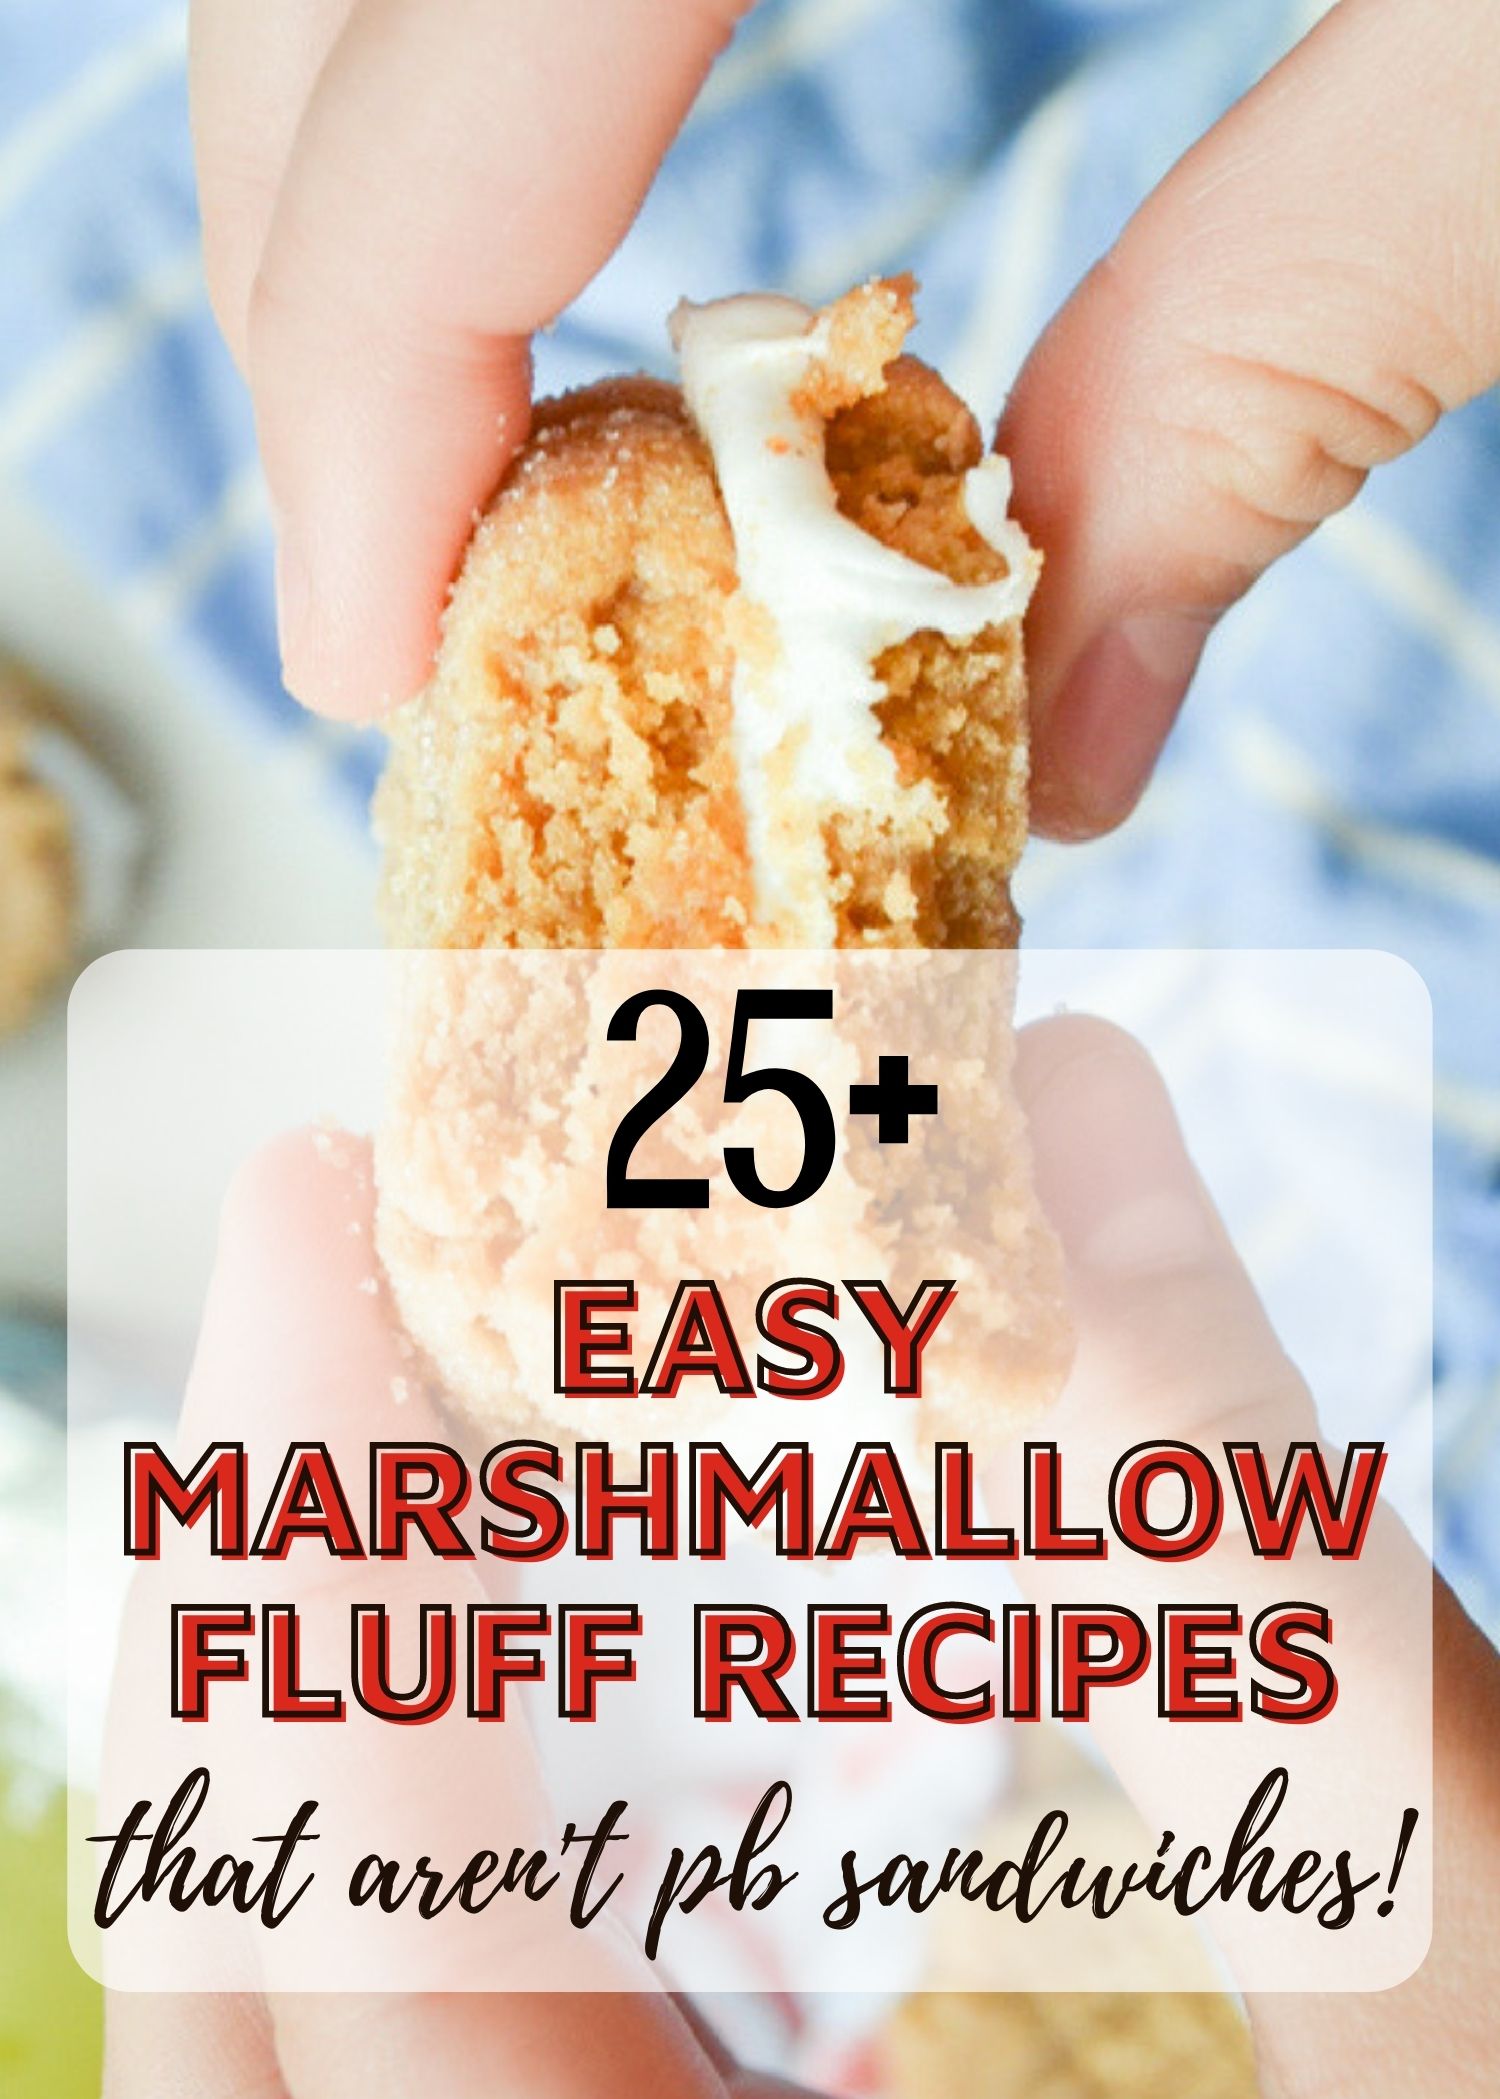 Are Marshmallow Fluff and Marshmallow Creme the Same thing?